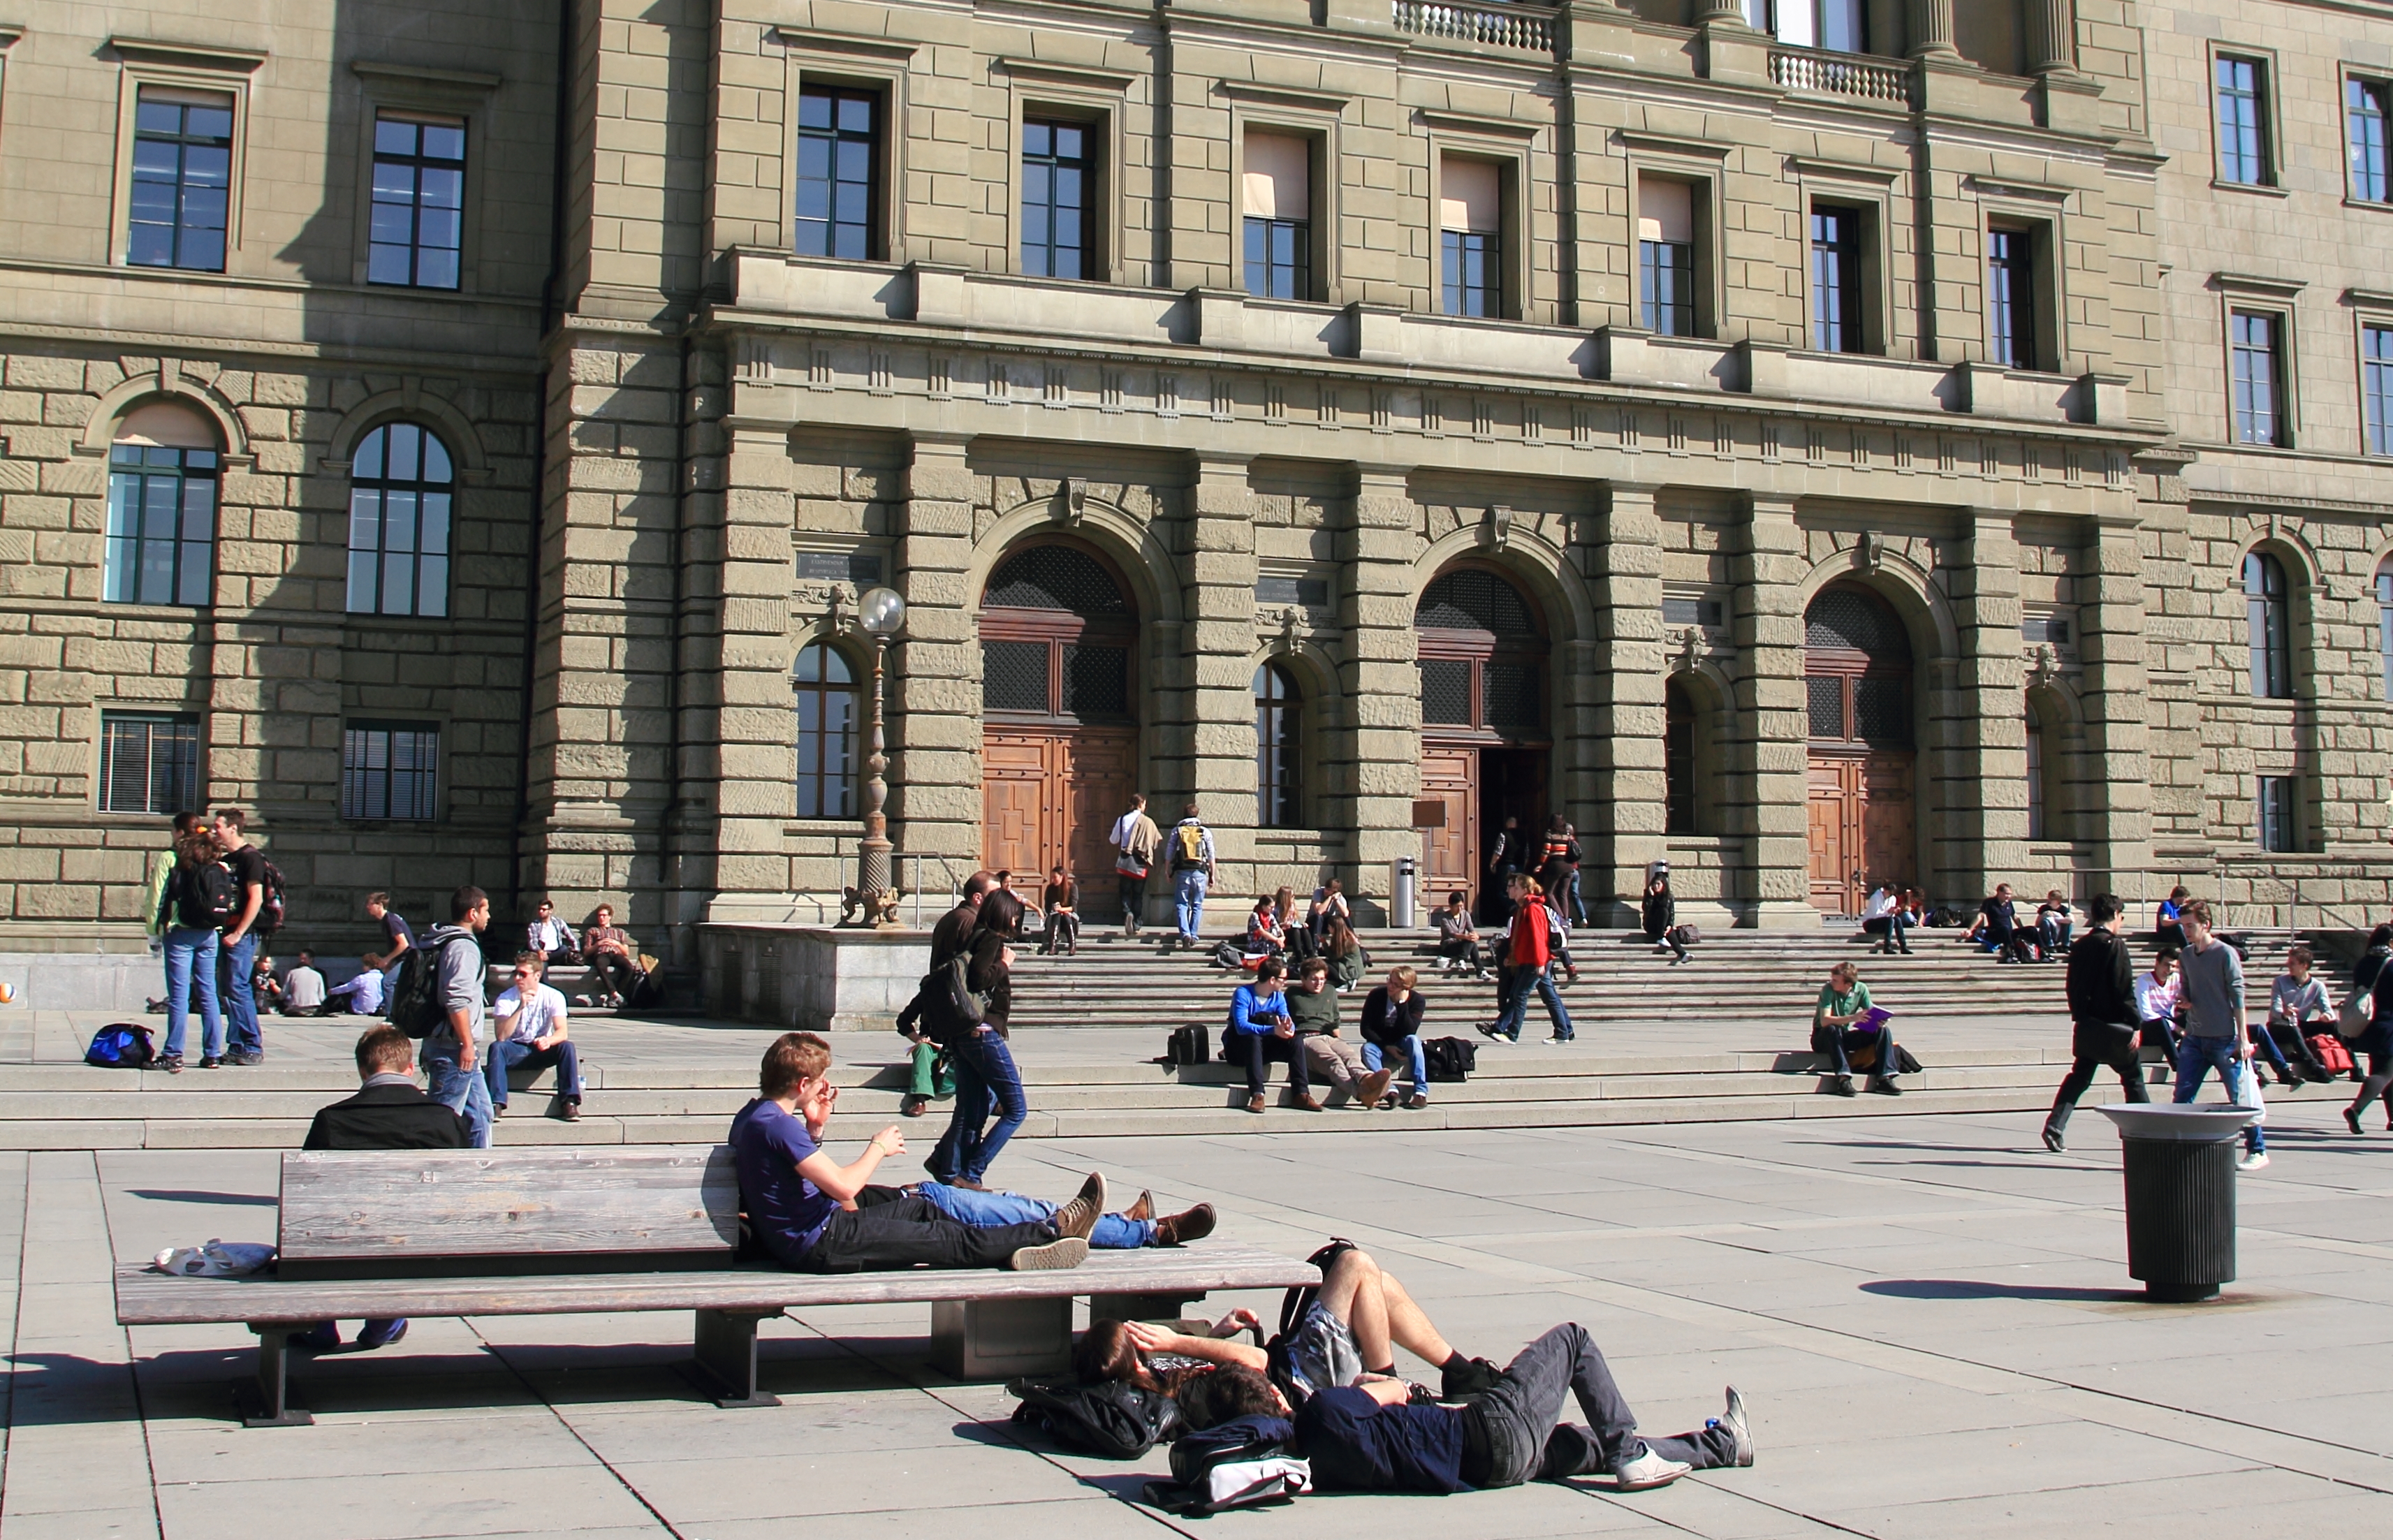 UK and Swiss universities fare well in global ranking